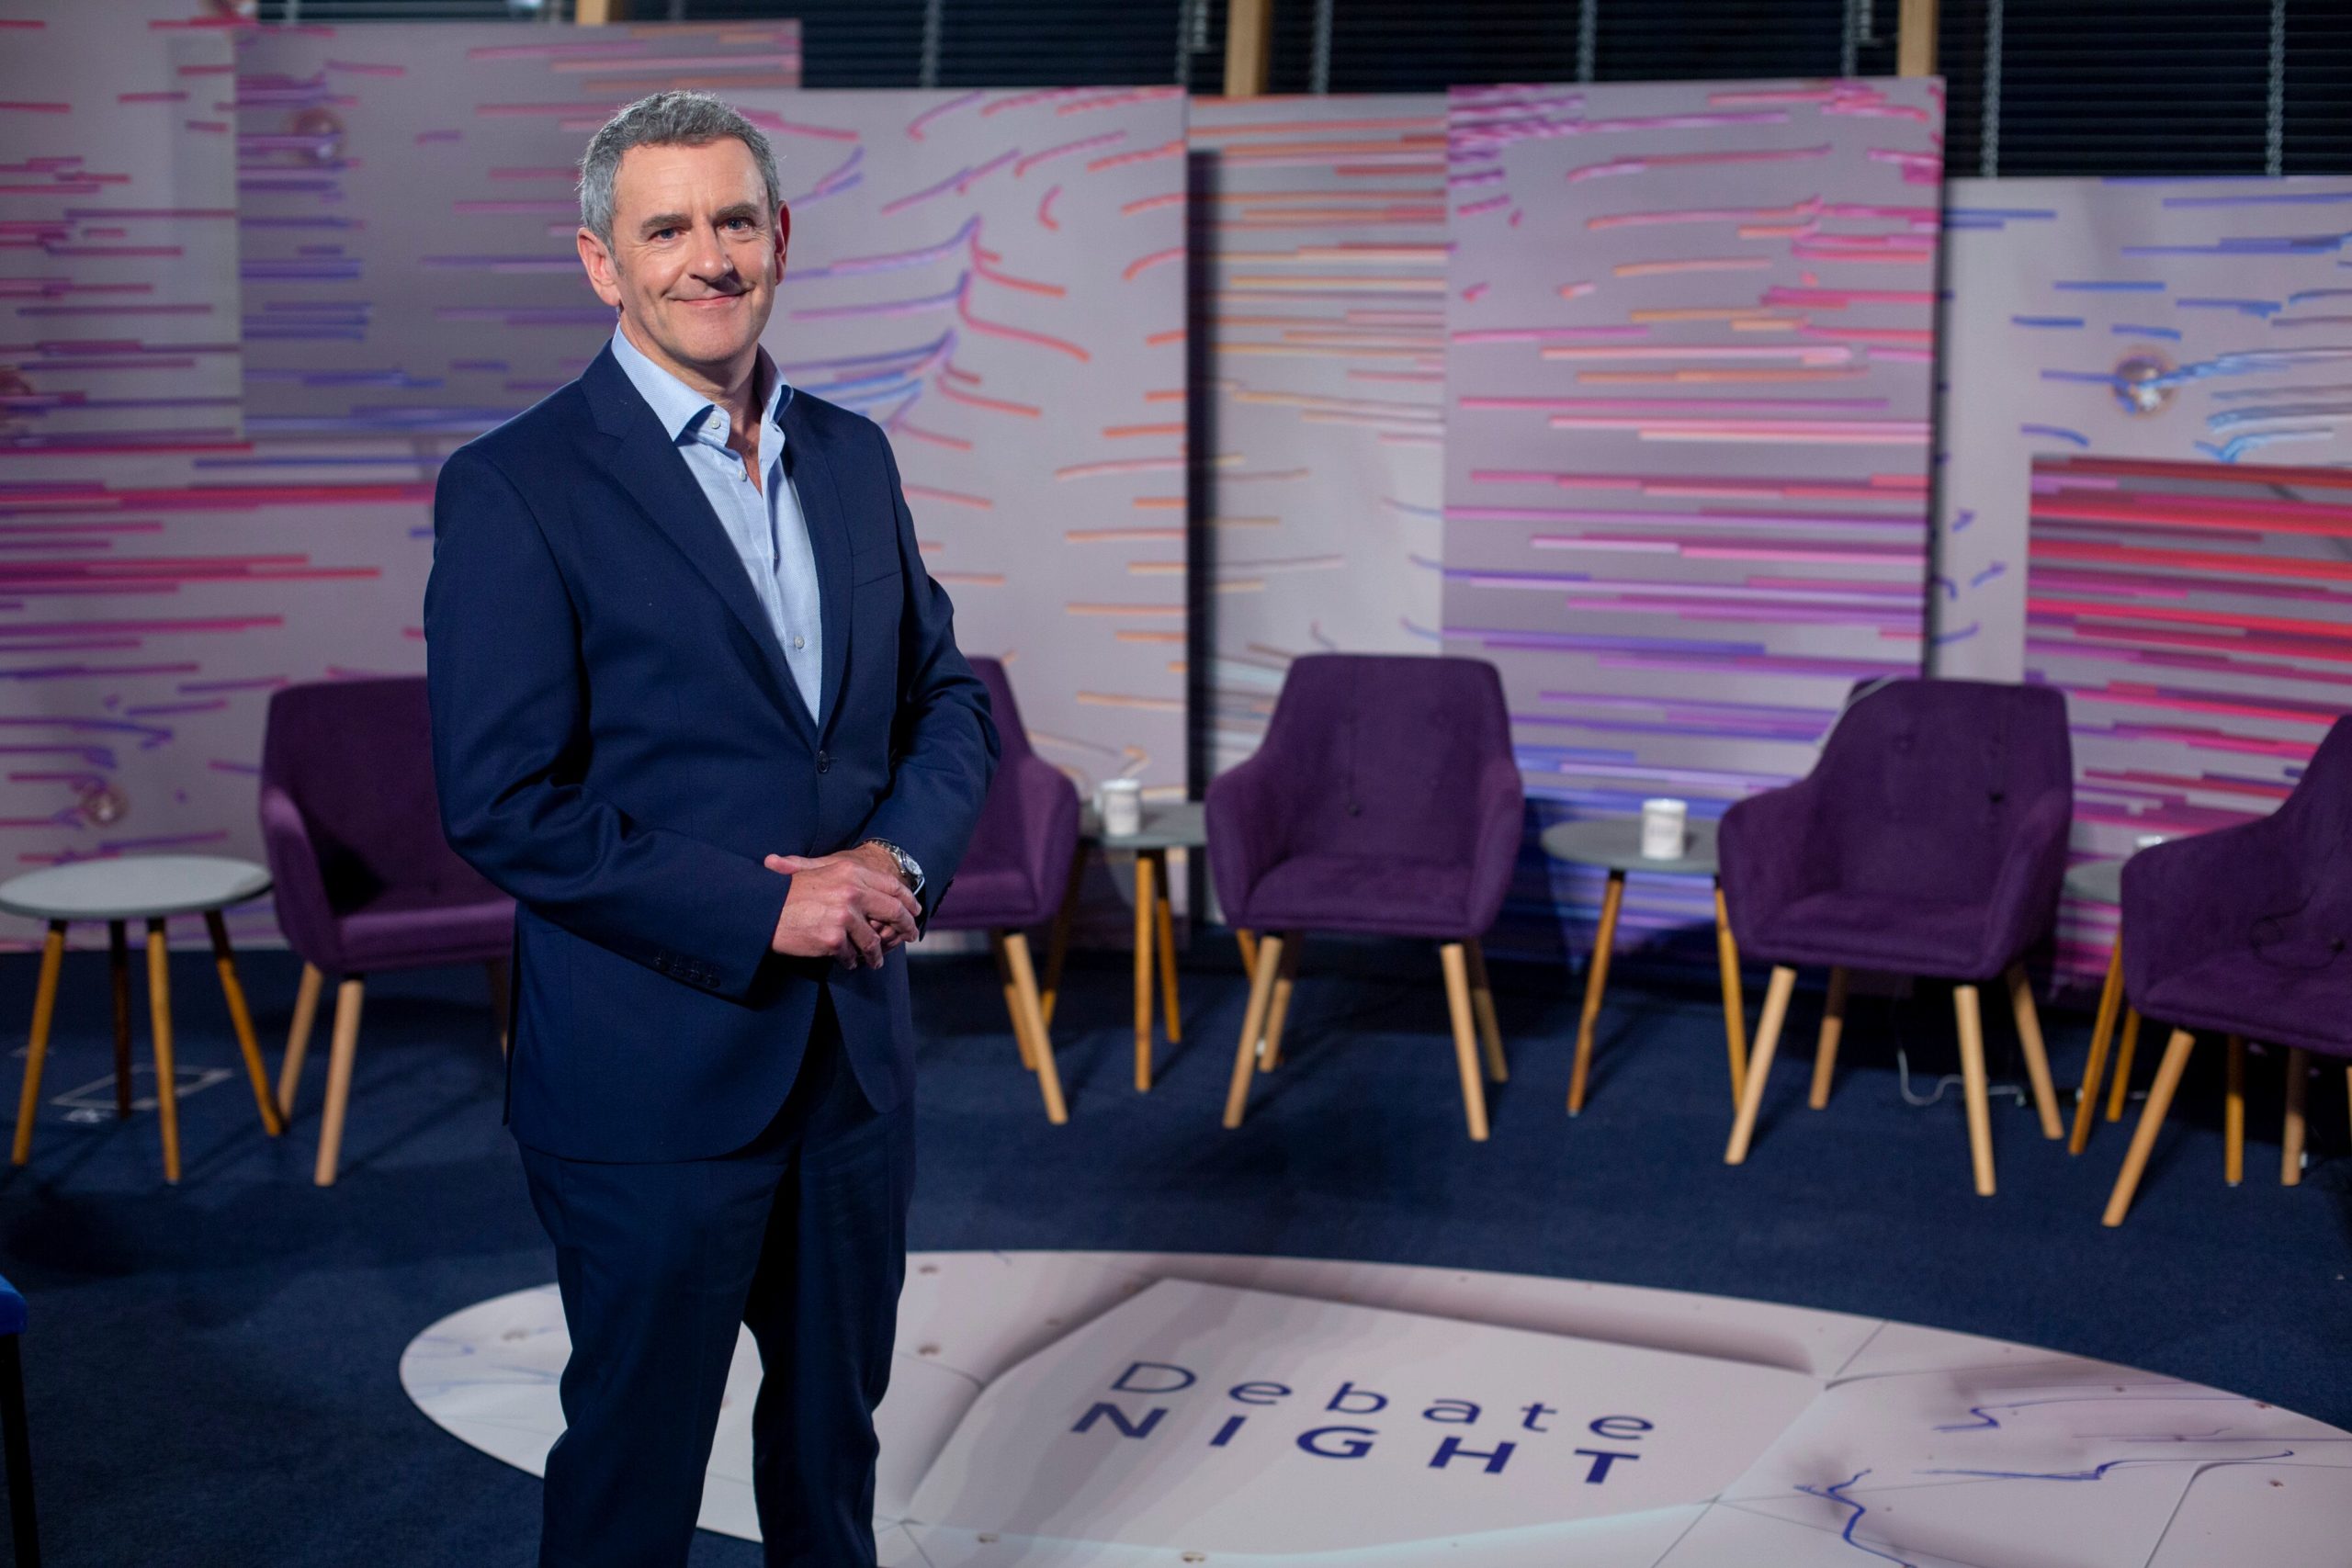 Presenter Stephen Jardine said that the show was "determined" to give people across the country an opportunity to question those in charge in Scotland.